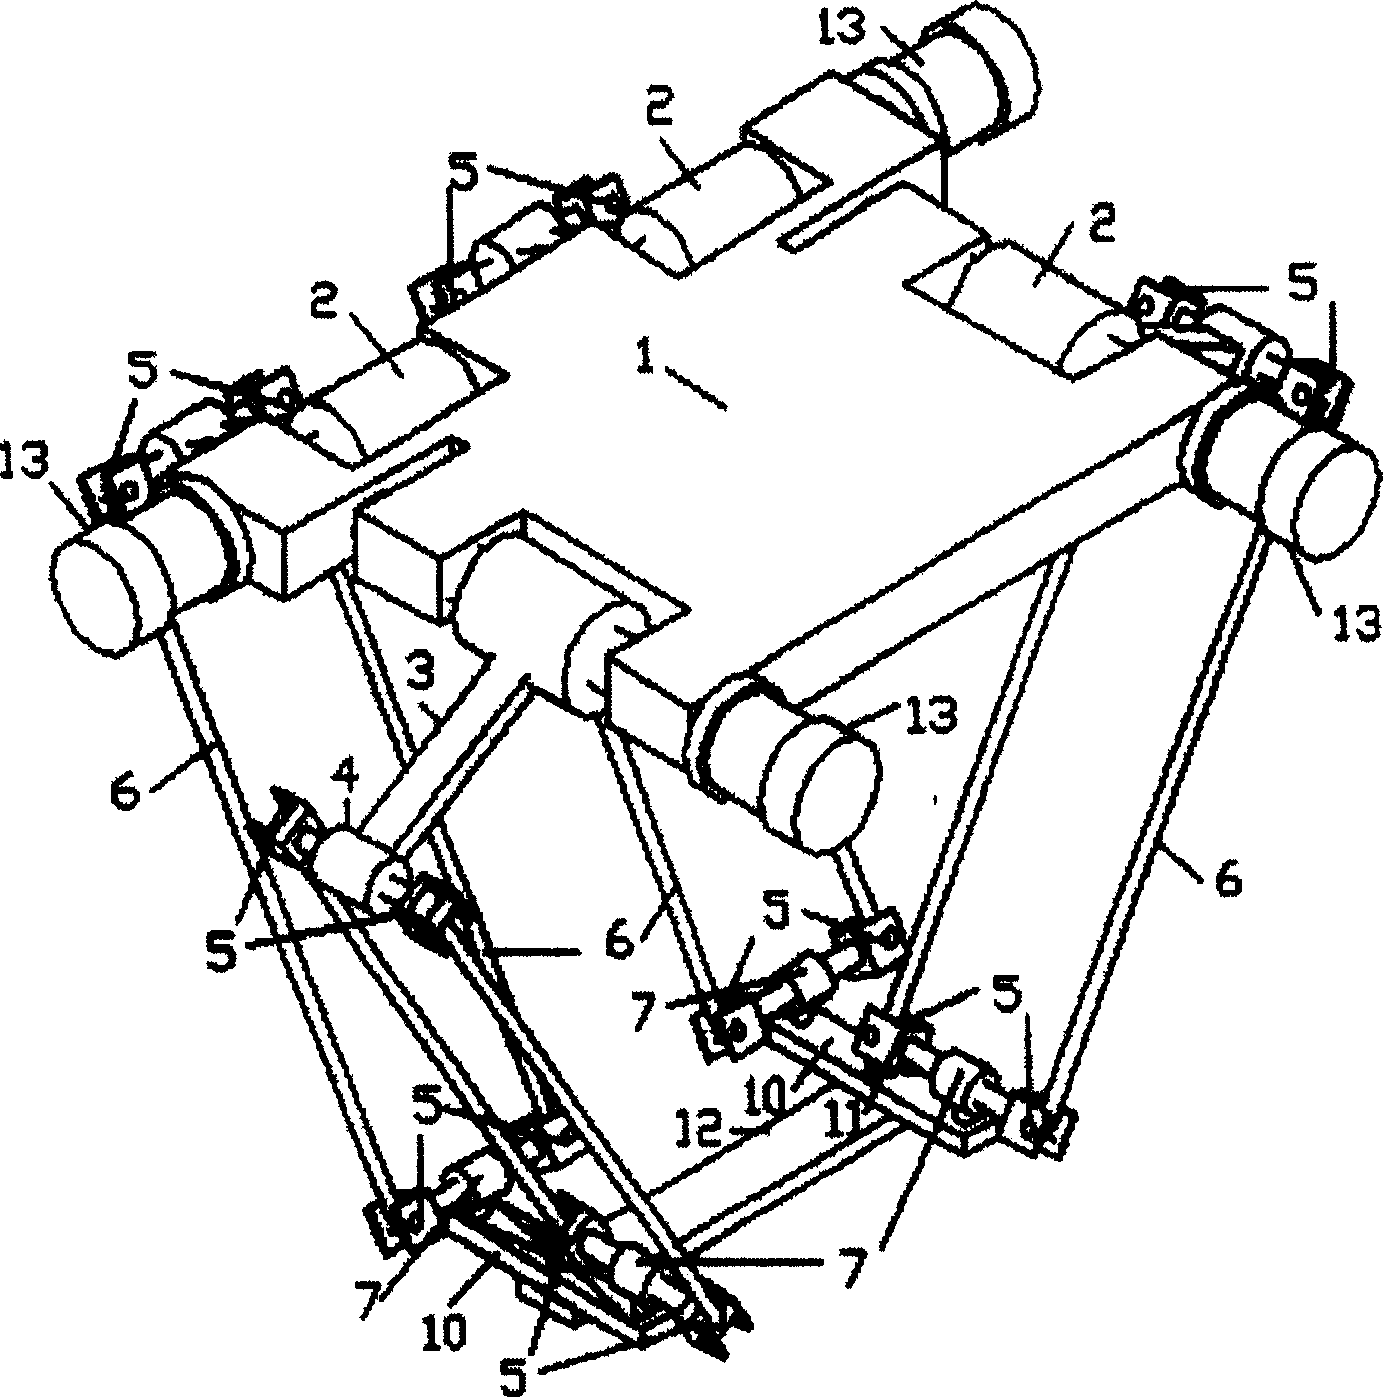 Three-translation and one-rotation parallel mechanism